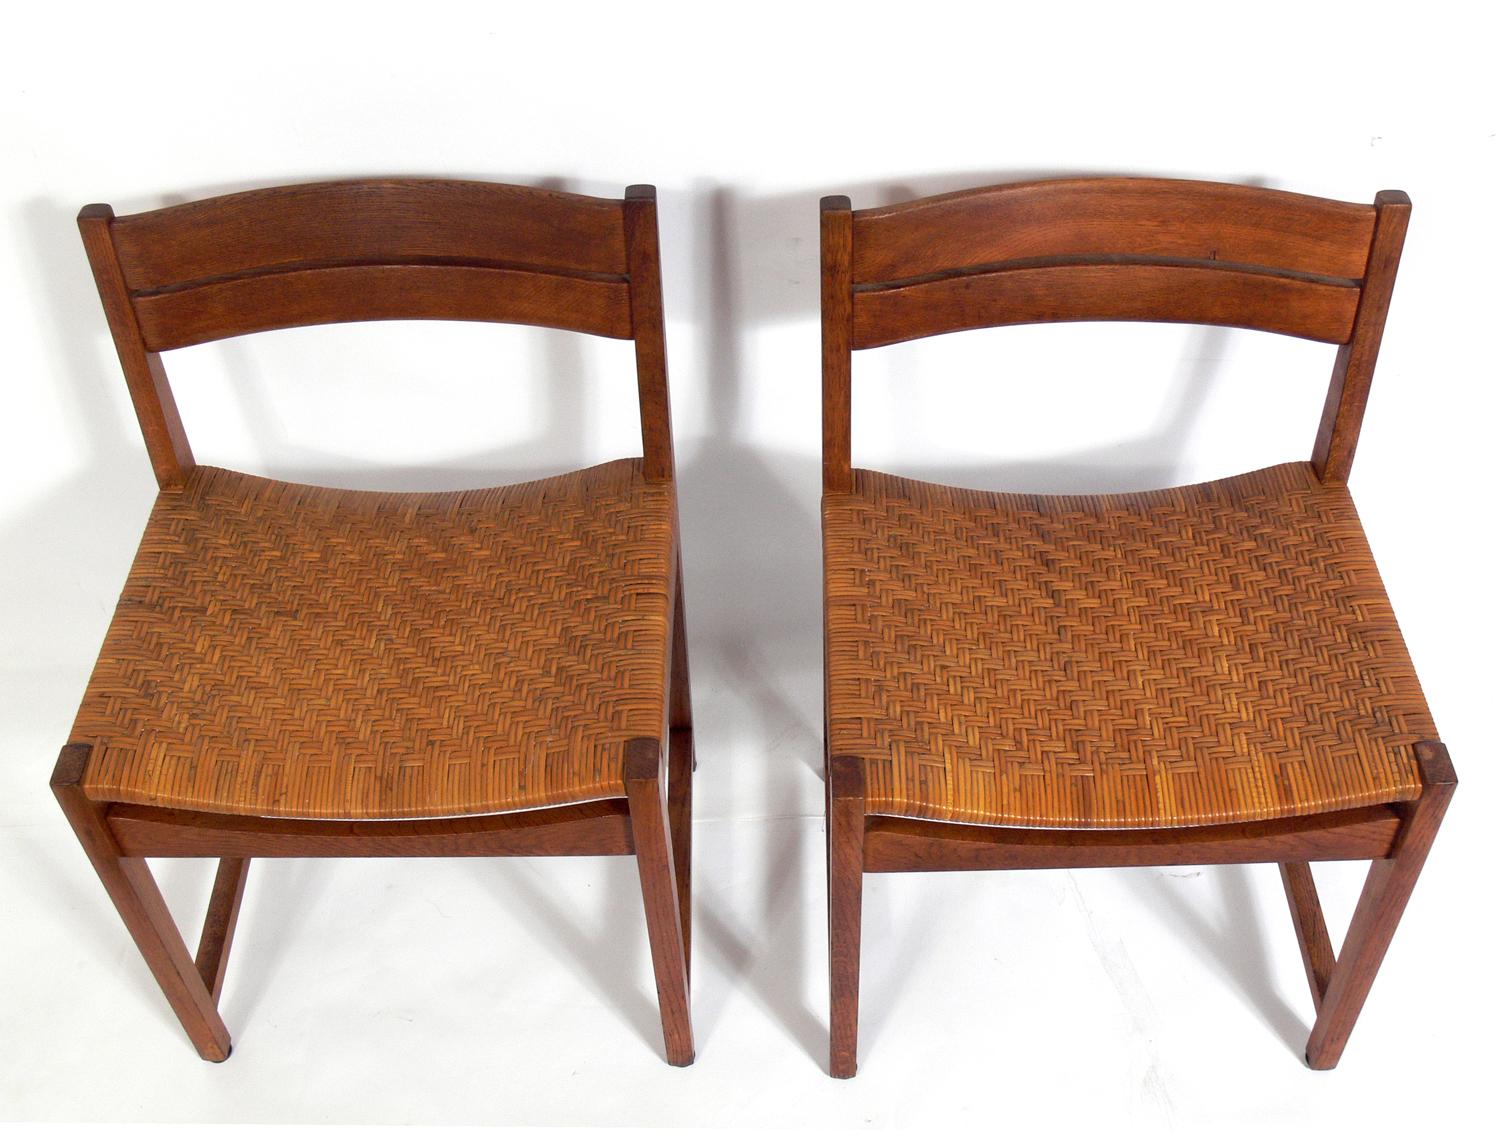 Set of four Danish modern teak and caned dining chairs, designed by Peter Hvidt & Olga Mølgaard-Nielsen, Denmark, circa 1960s. They have been cleaned and Danish oiled.